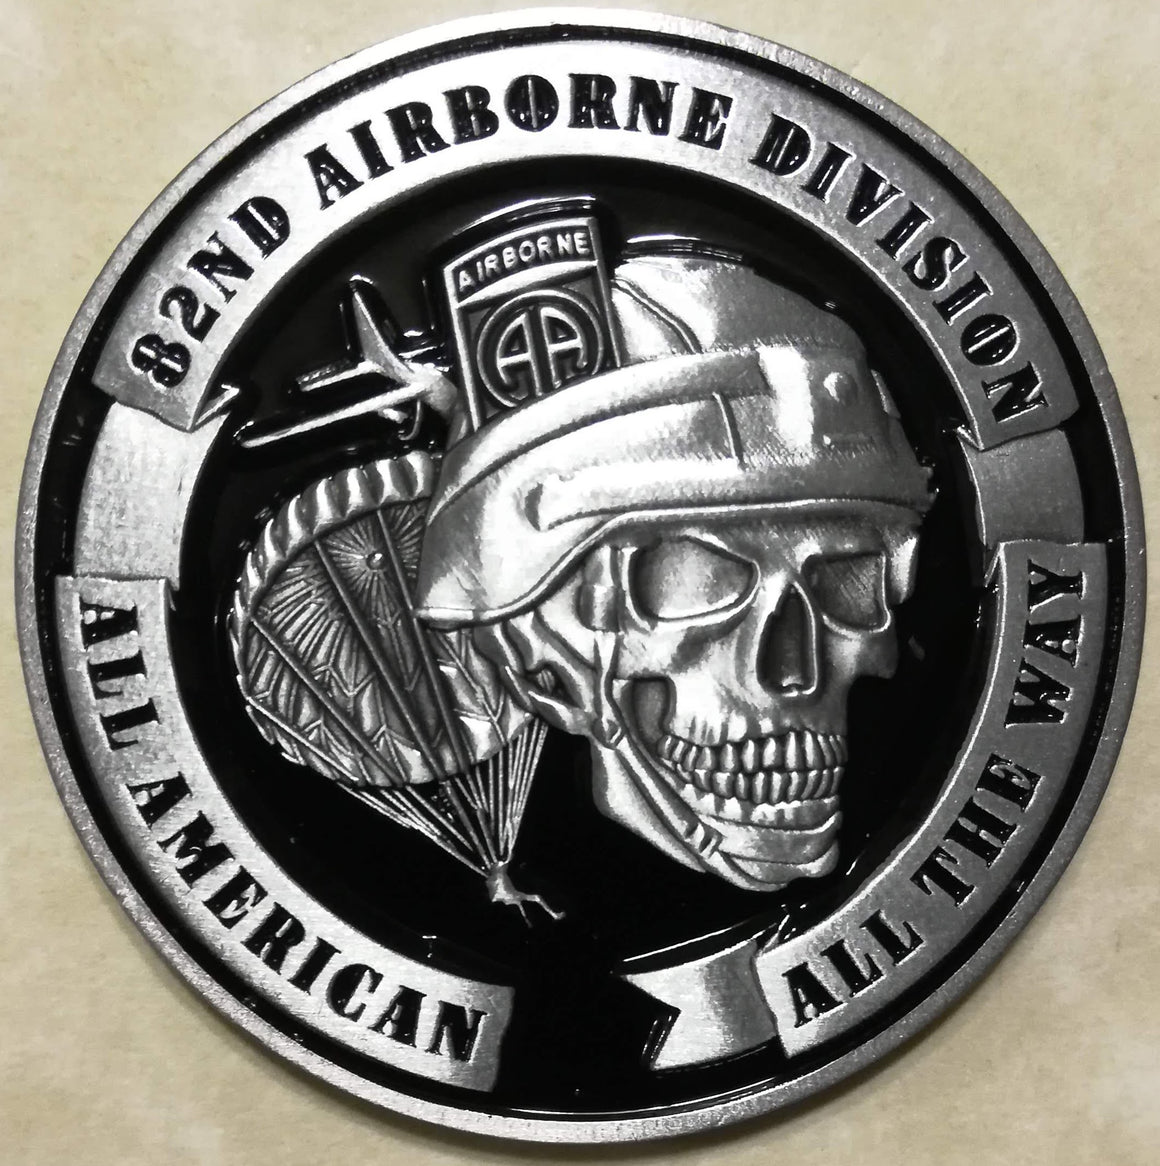 82nd Airborne Division All American Skull Army Challenge Coin Rolyat